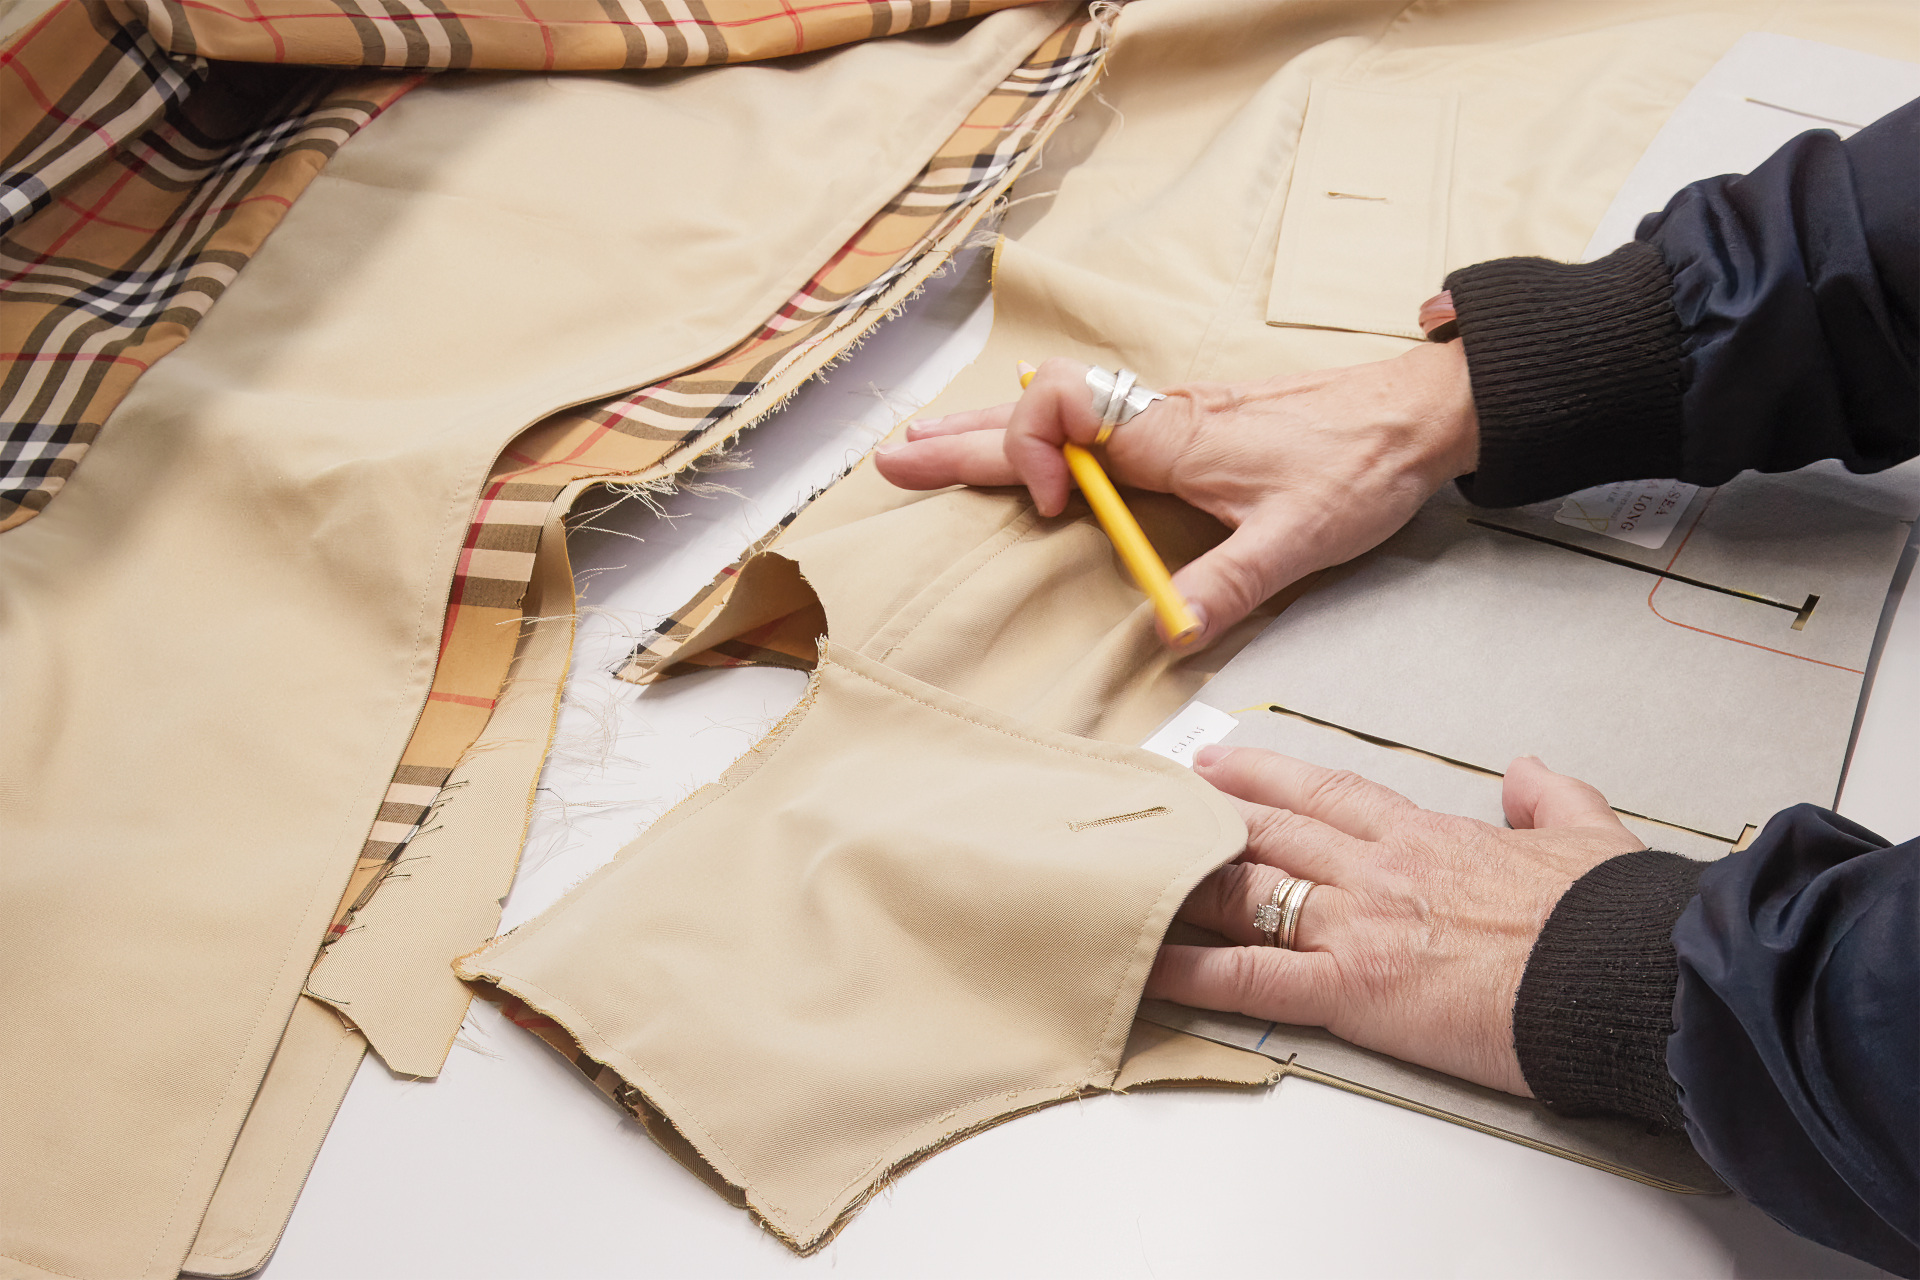 Hands cutting a Burberry trench coat